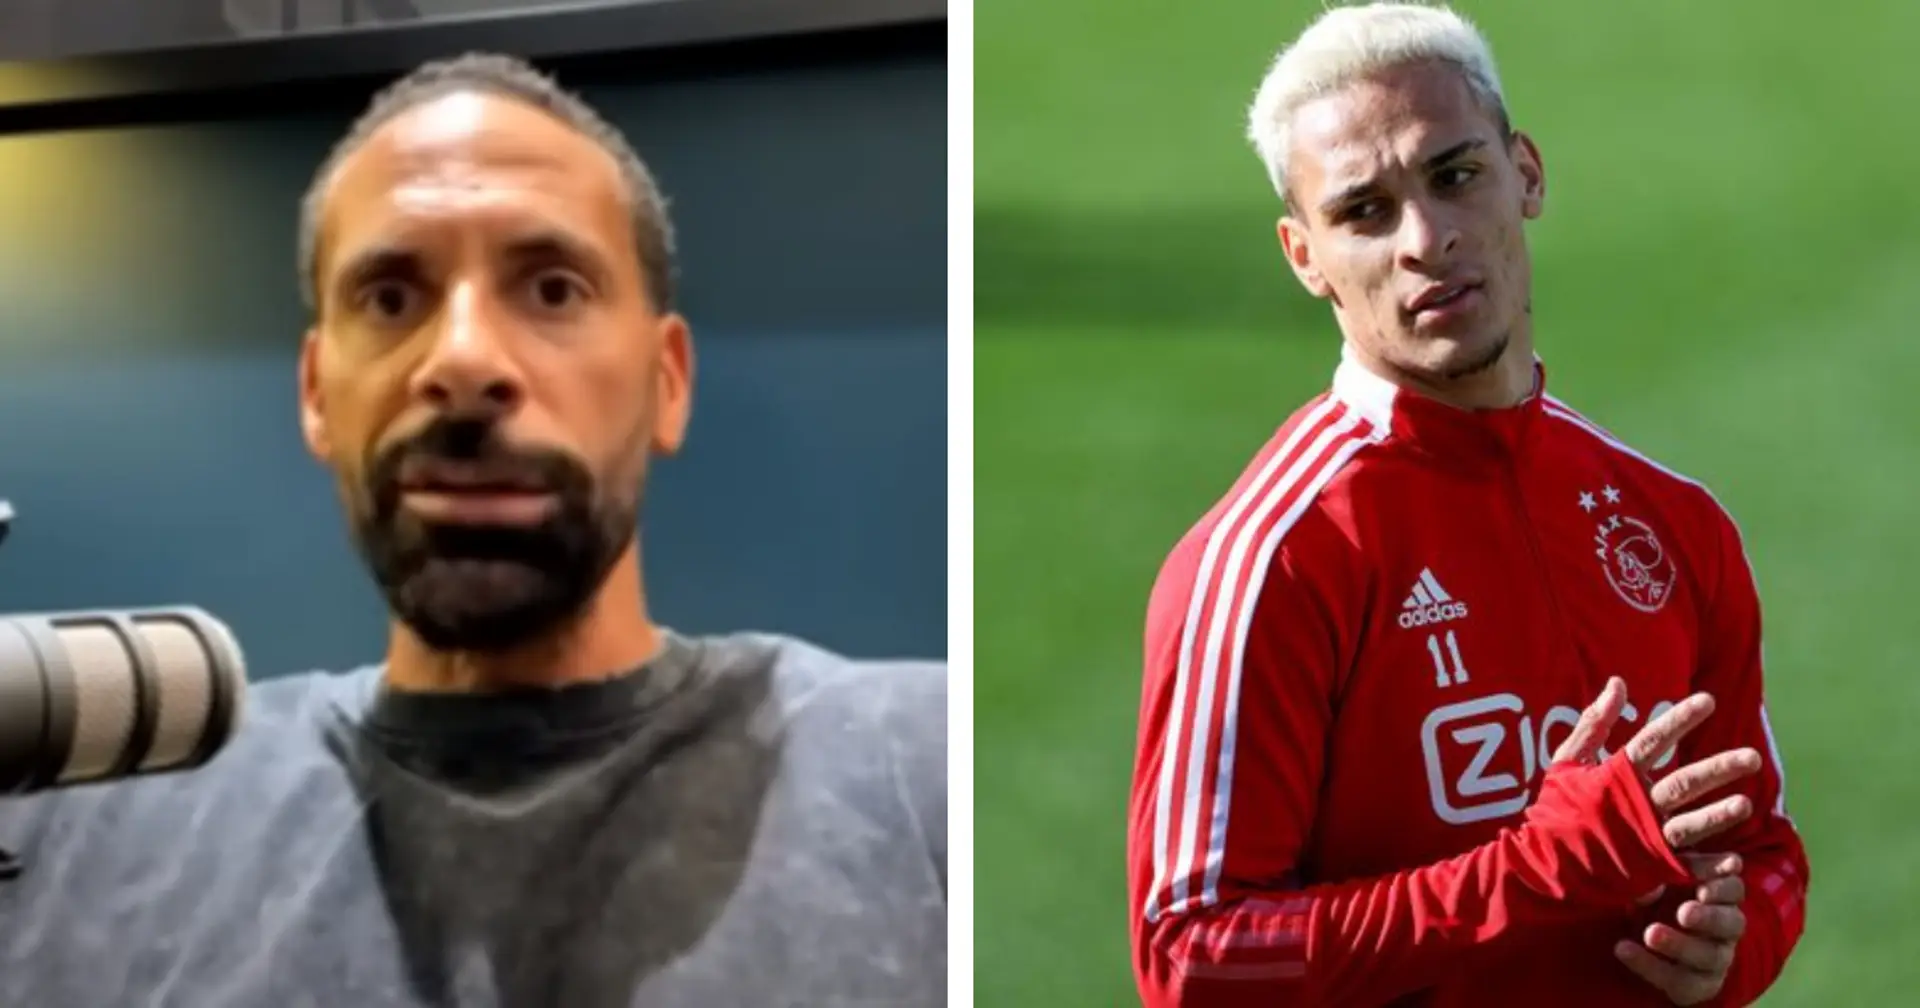 'He's not the end product. He's going to make mistakes': Rio Ferdinand calls for patient approach for Antony